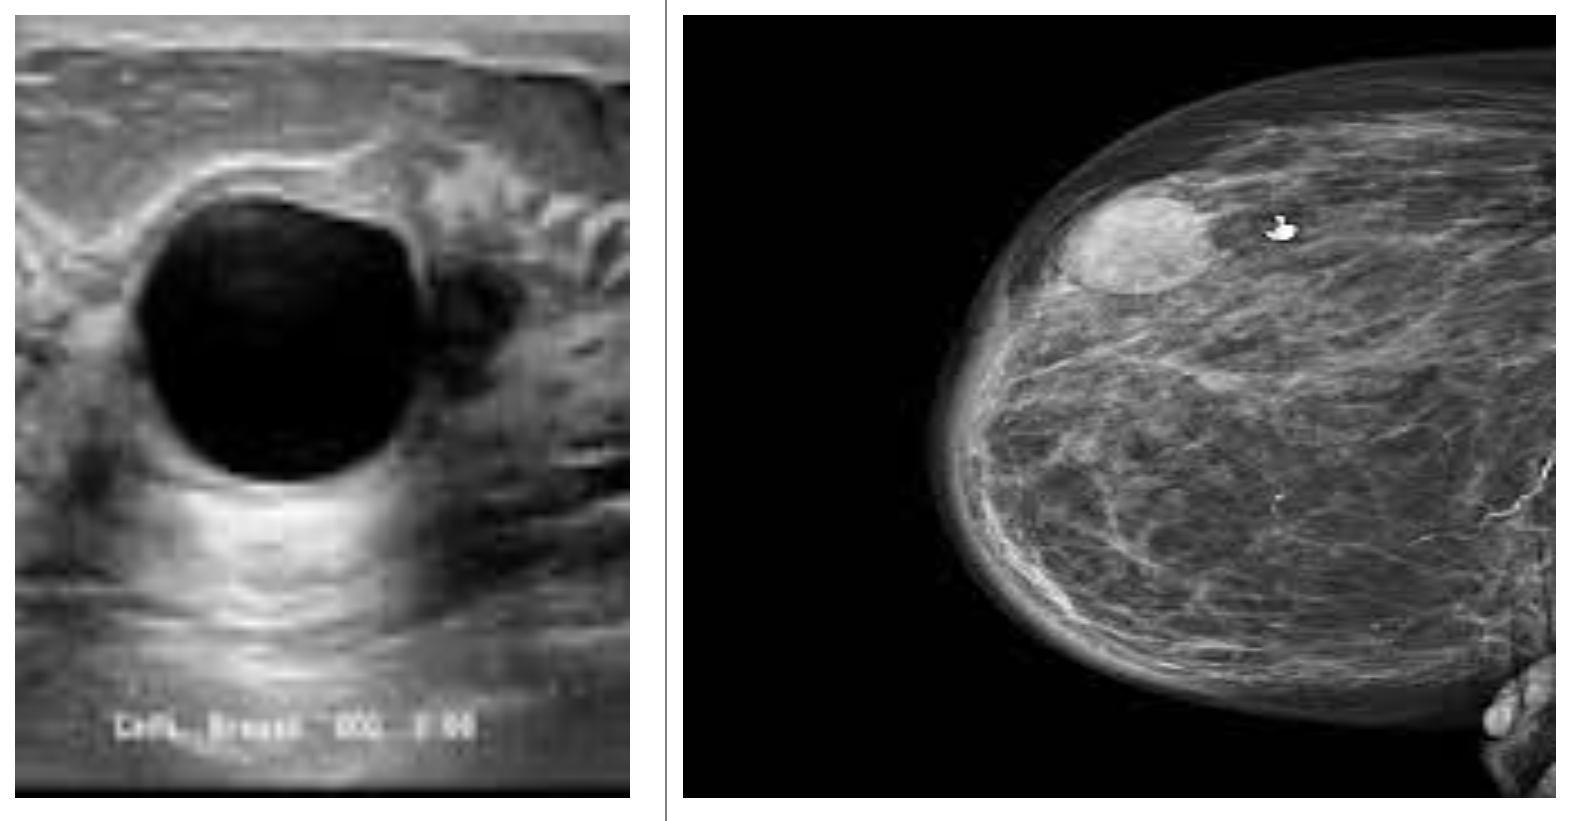 breast cyst on ultrasound and mammogram